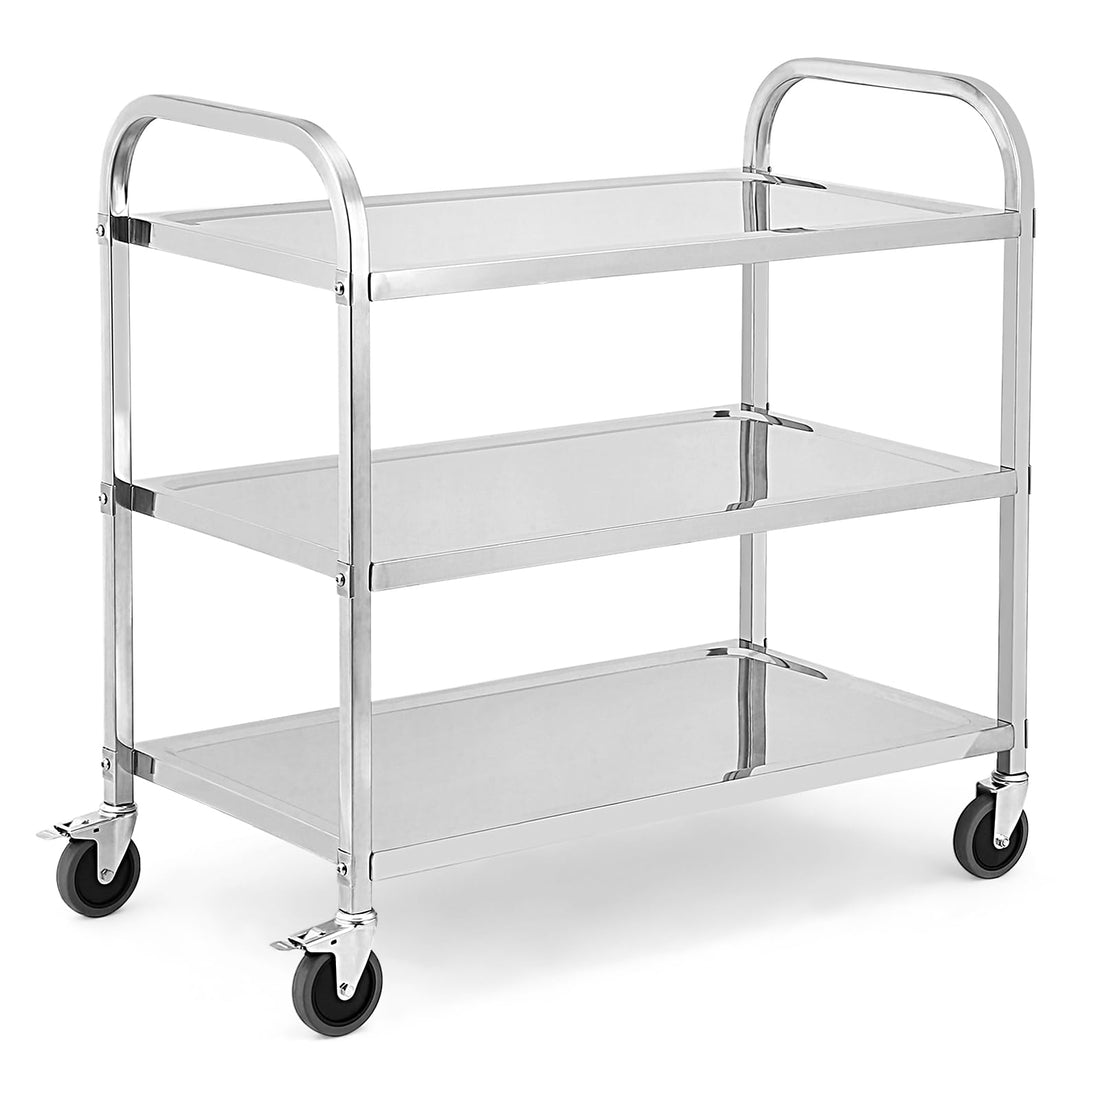 3 Tier Heavy Duty Trolley Rolling Cart, Stainless Steel Utility Cart with Handle and Locking Wheels, for Kitchen, Restaurant, Hospital, Laboratory and Home,  265Lbs